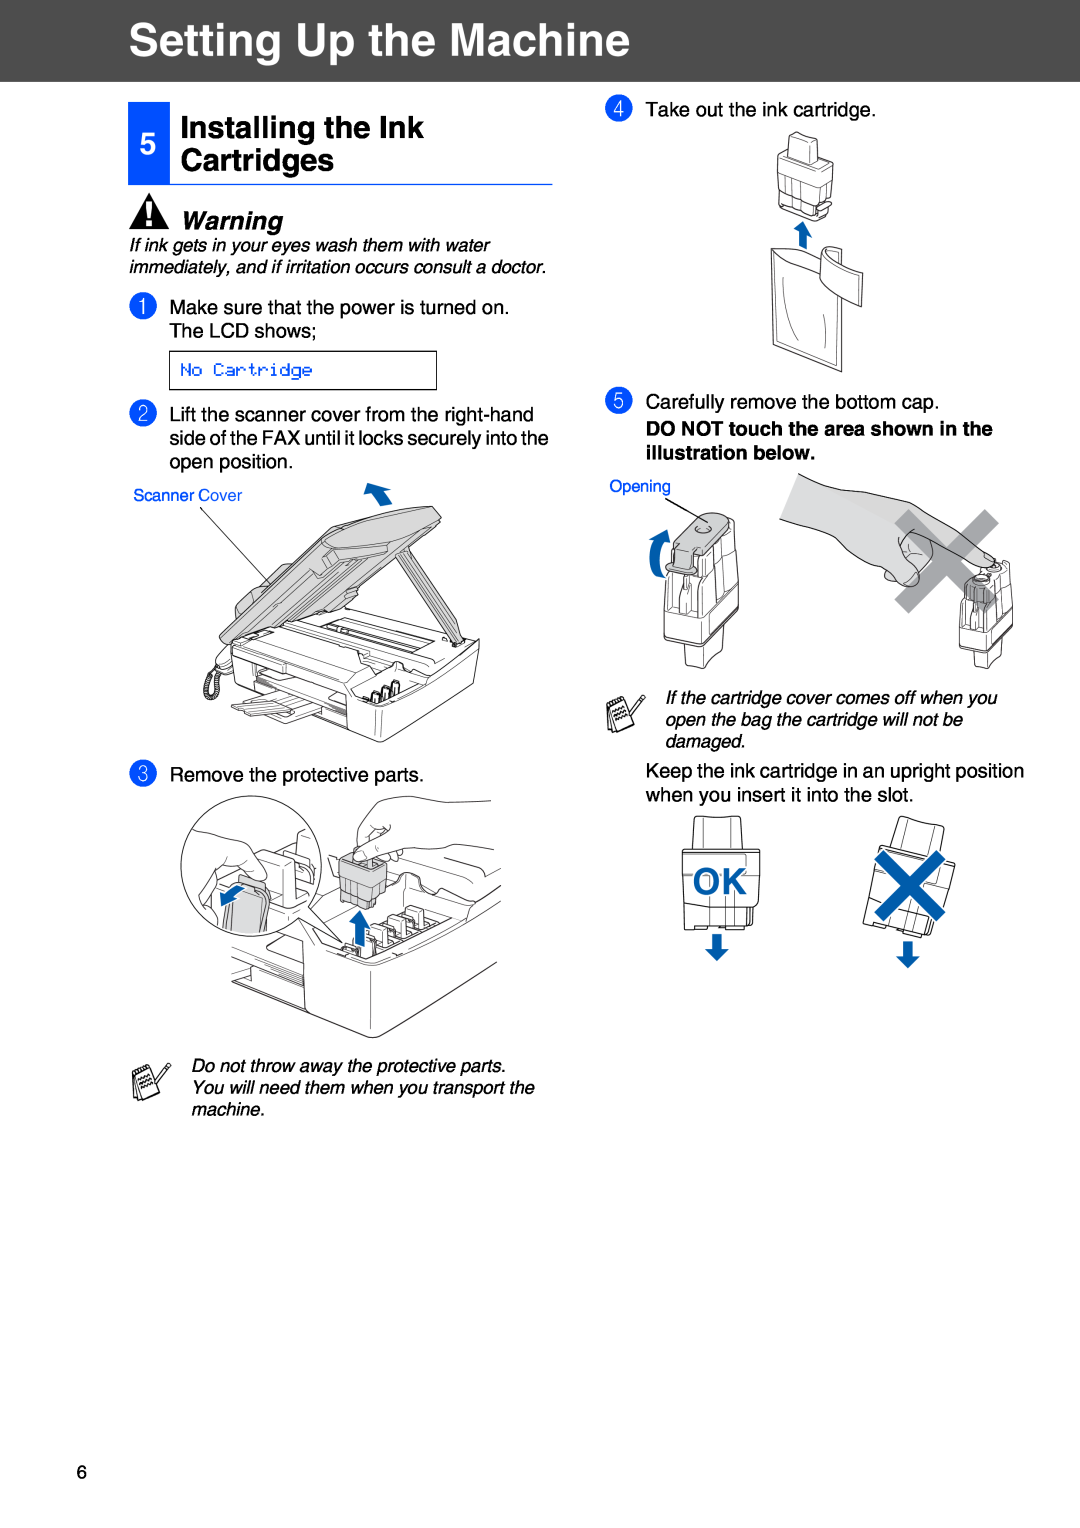 Brother FAX-2440C Installing the Ink Cartridges, No Cartridge, DO NOT touch the area shown in the illustration below 